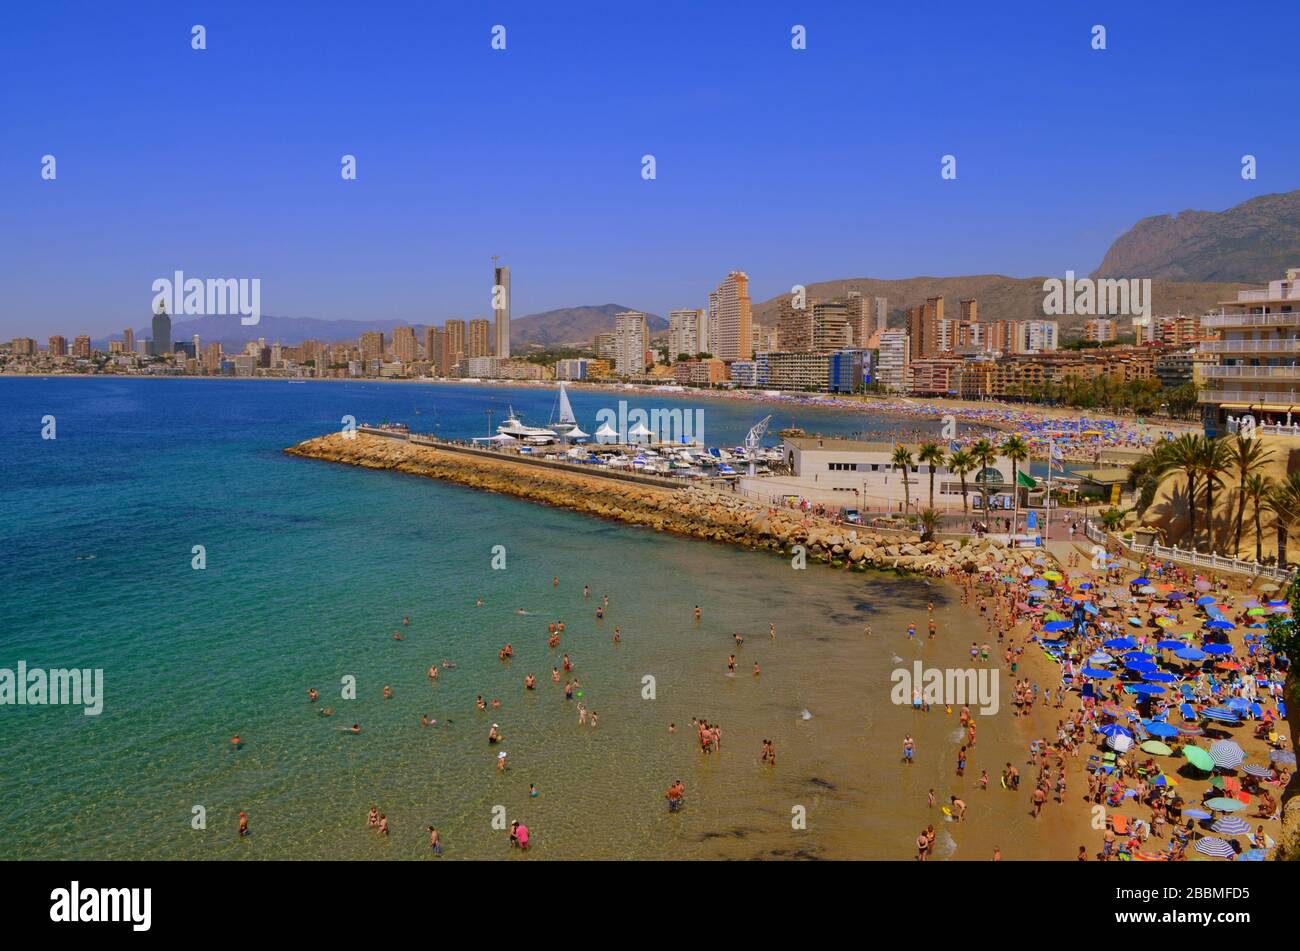 A view of Levante beach in Benidorm taken from Poniente beach, the busier side of the resort. Levante is the quietest part of Benidorm. Stock Photo